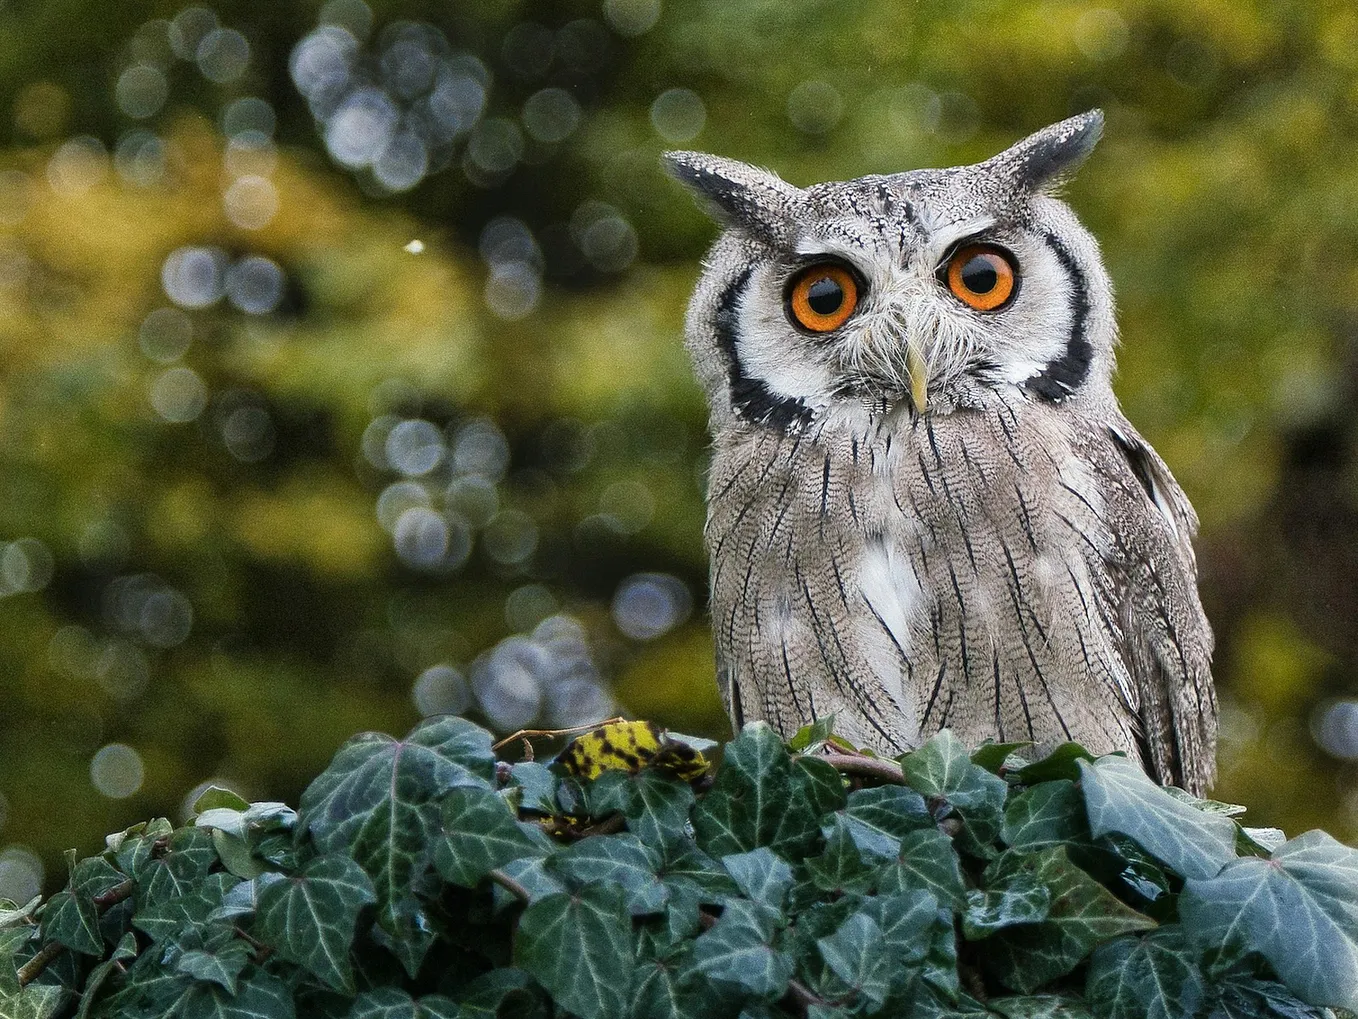 Owls: Known for their big eyes and silent flight, owls hunt small animals at night.